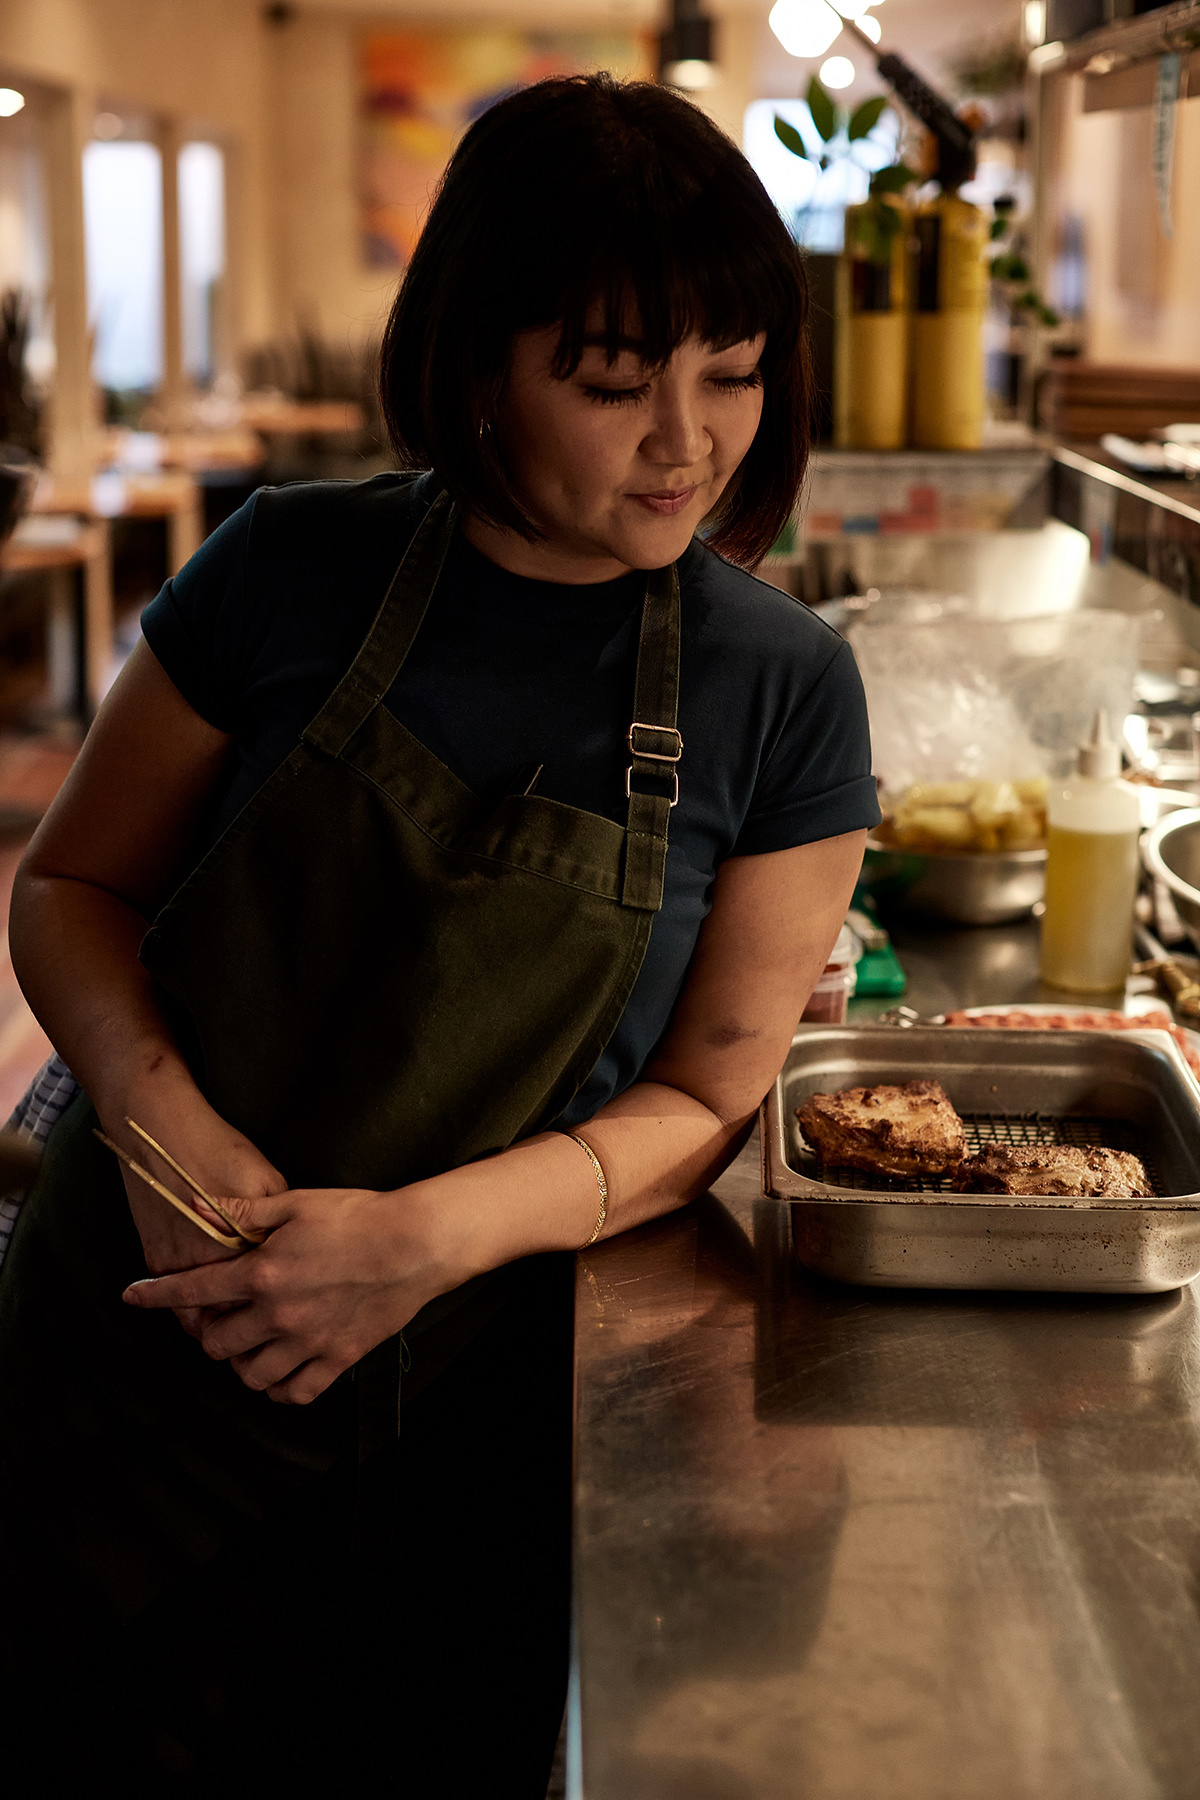 As a head chef, Rosheen is focused on ensuring her team’s happy, positive mental health.